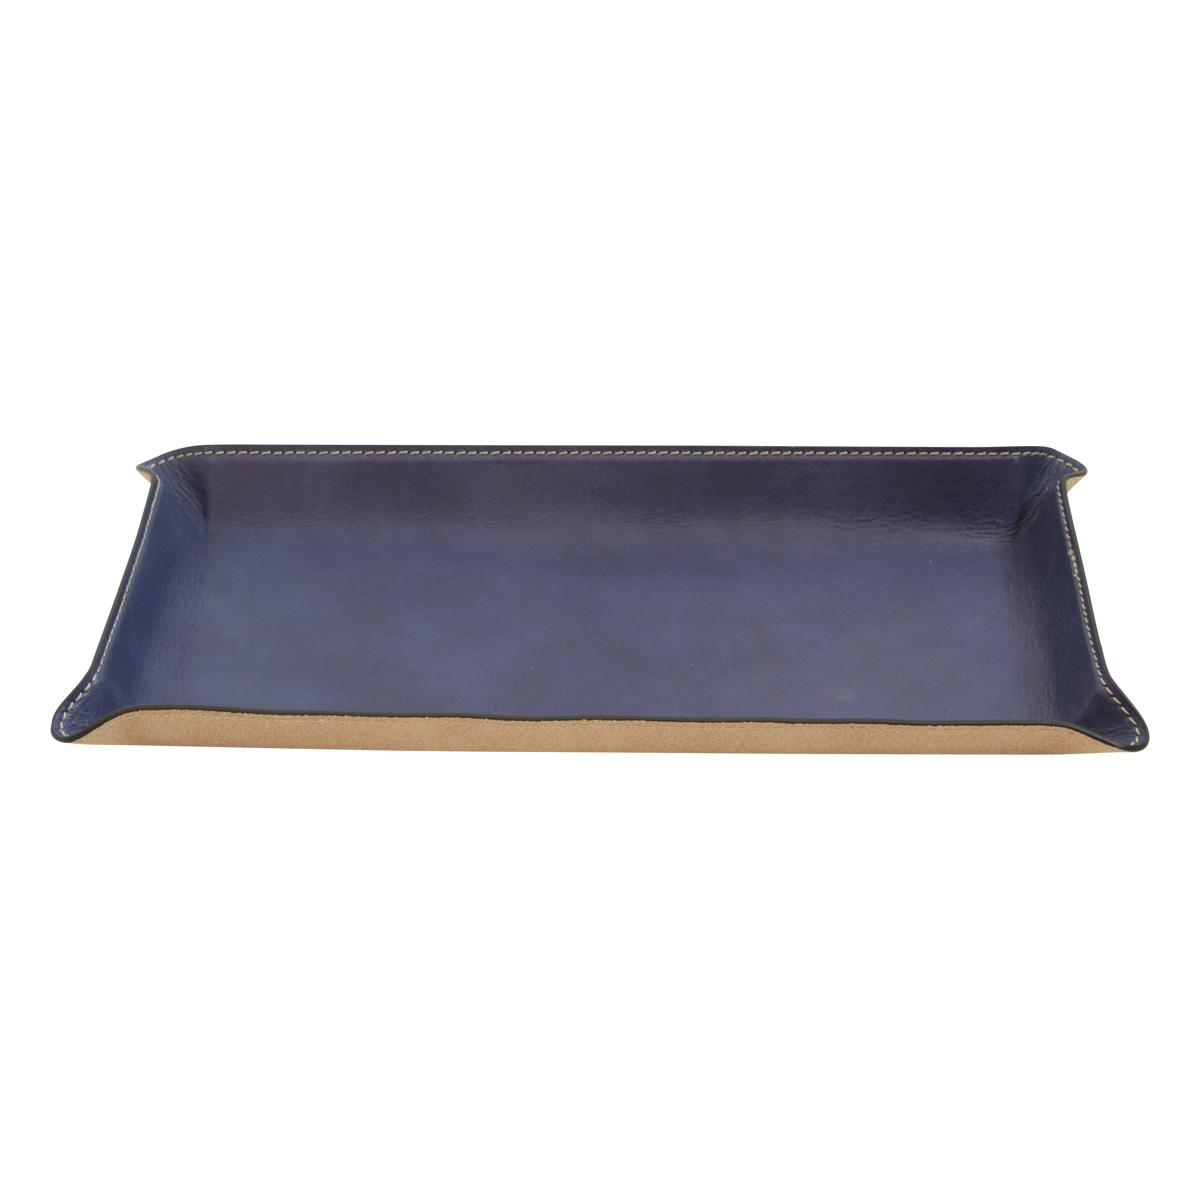 Leather desk tray  | 762089CB | EURO | Old Angler Firenze